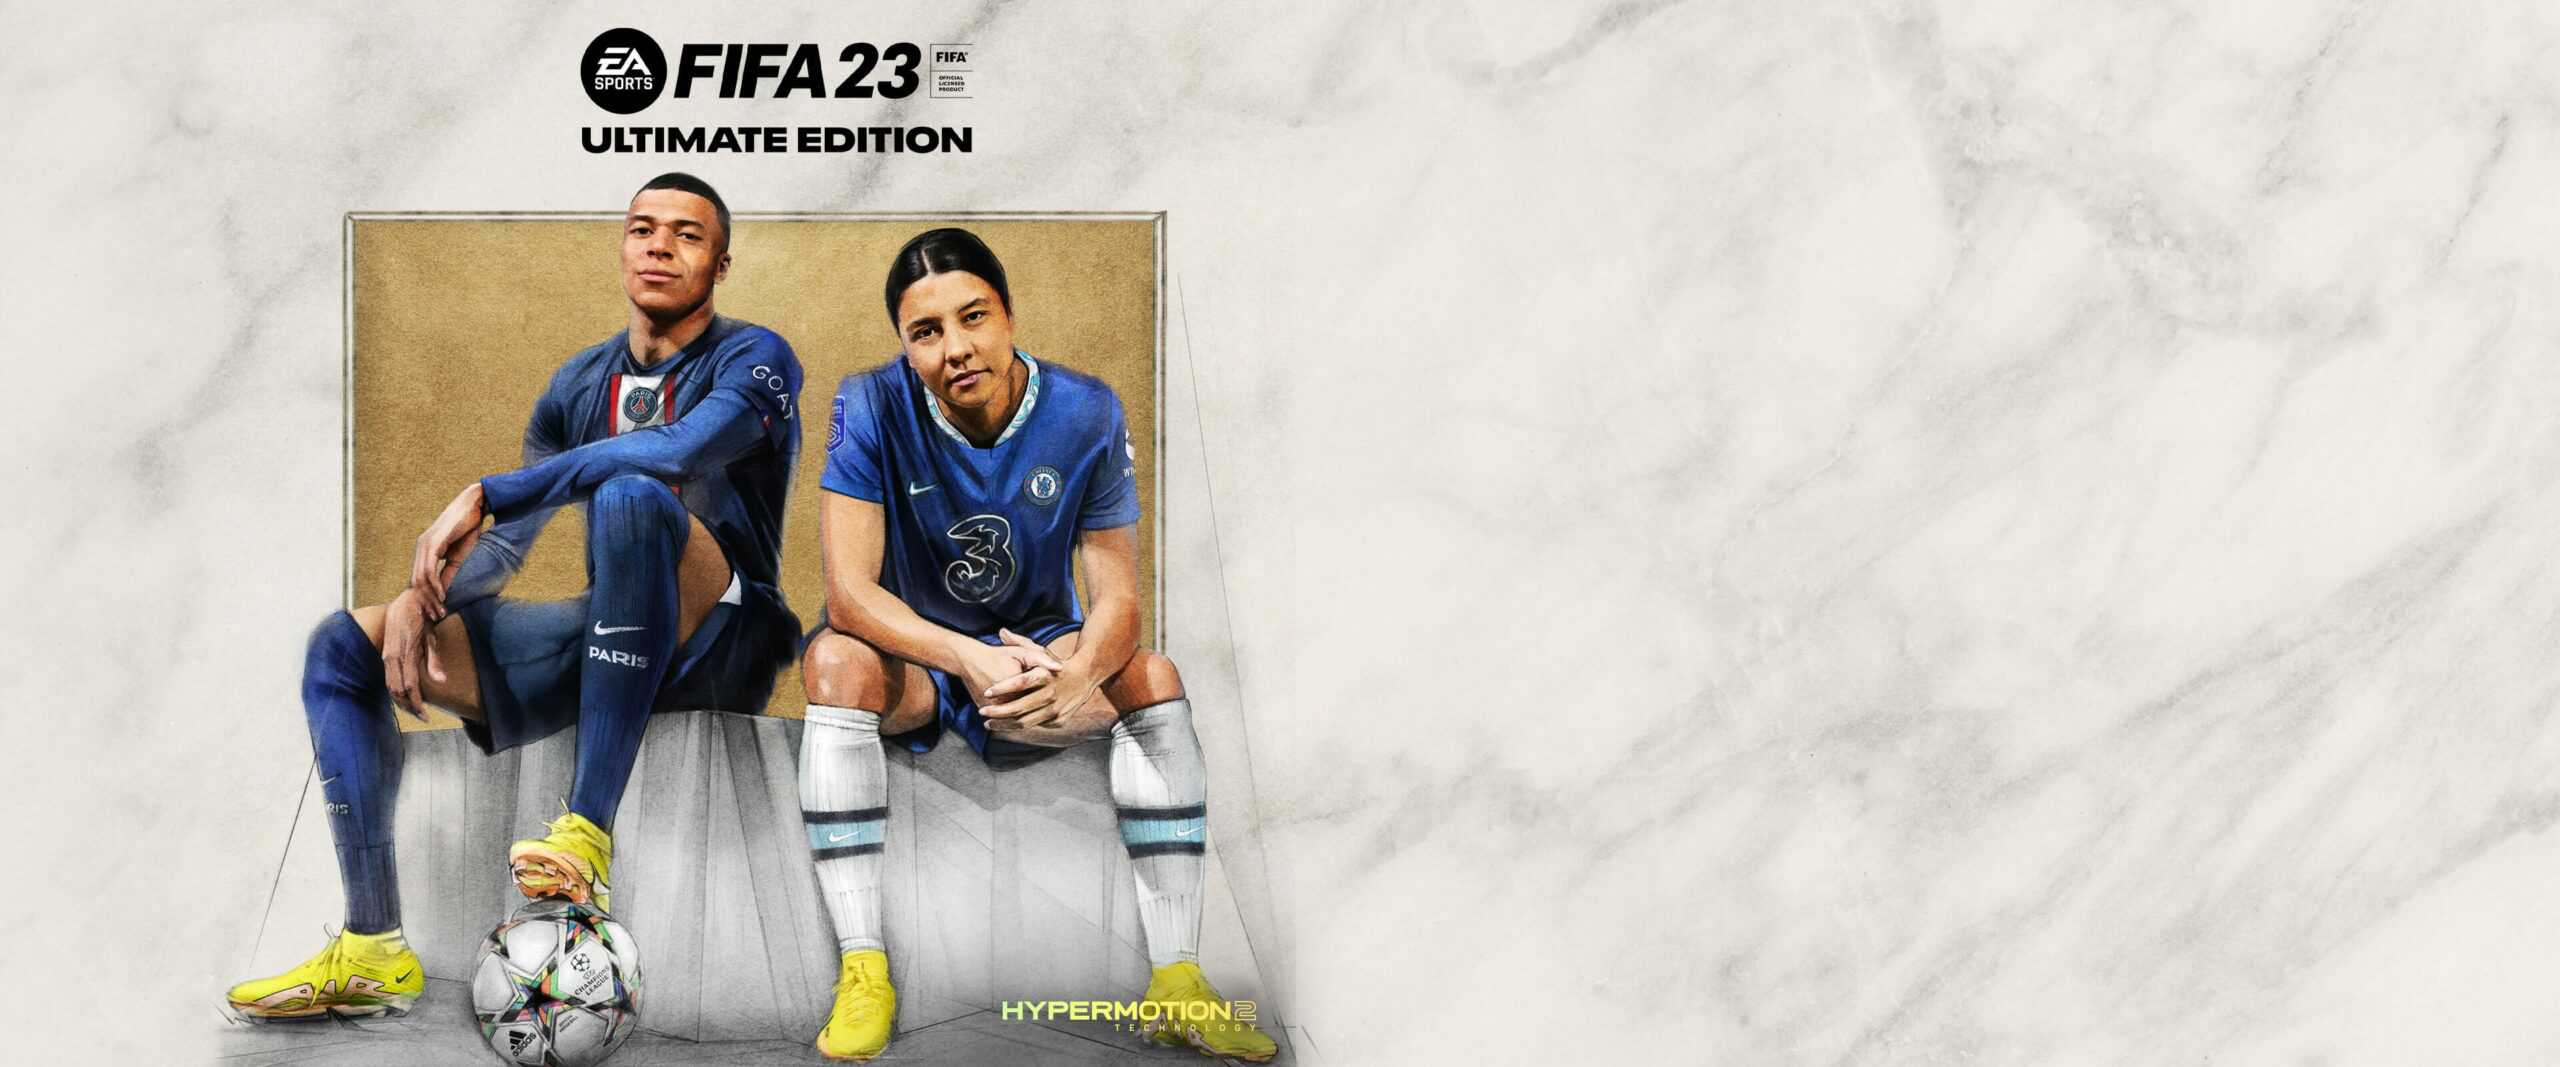 *UPDATED* FIFA 23 Release TIME – here’s when you can play the game